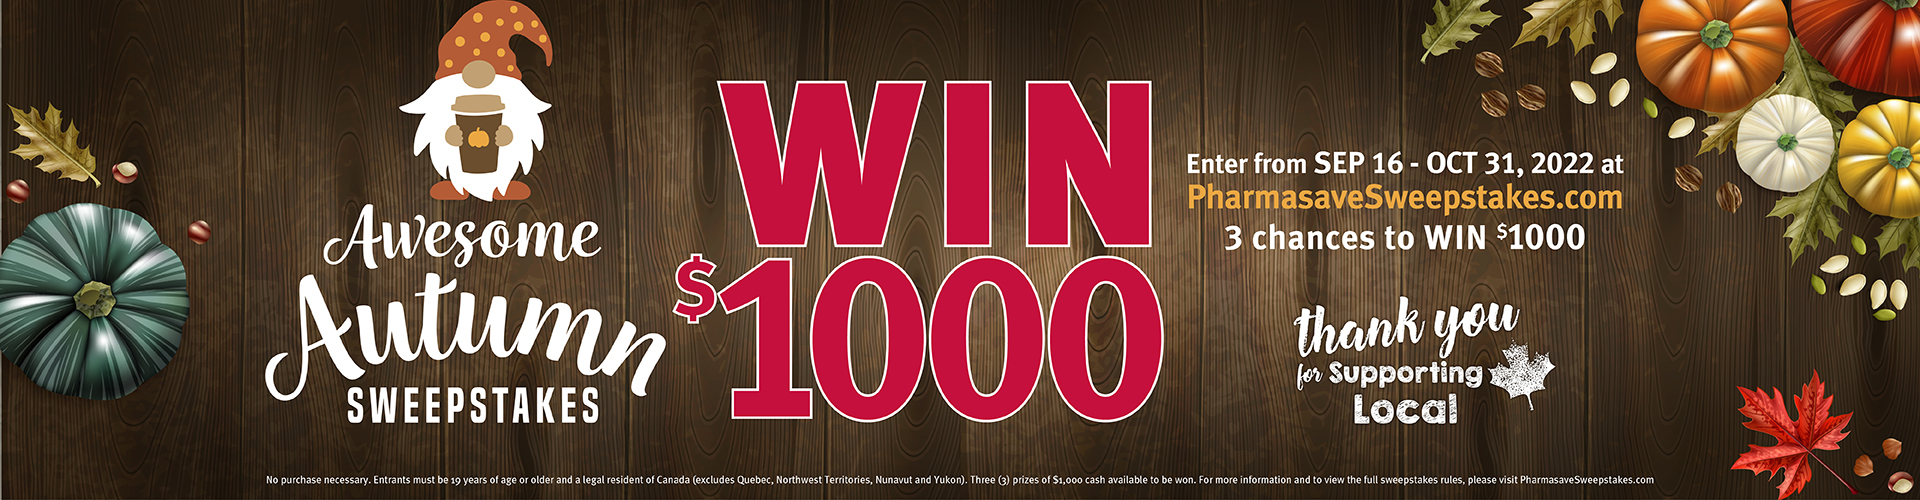 Enter Pharmasave's Awesome Autumn Sweepstakes to win $1000!